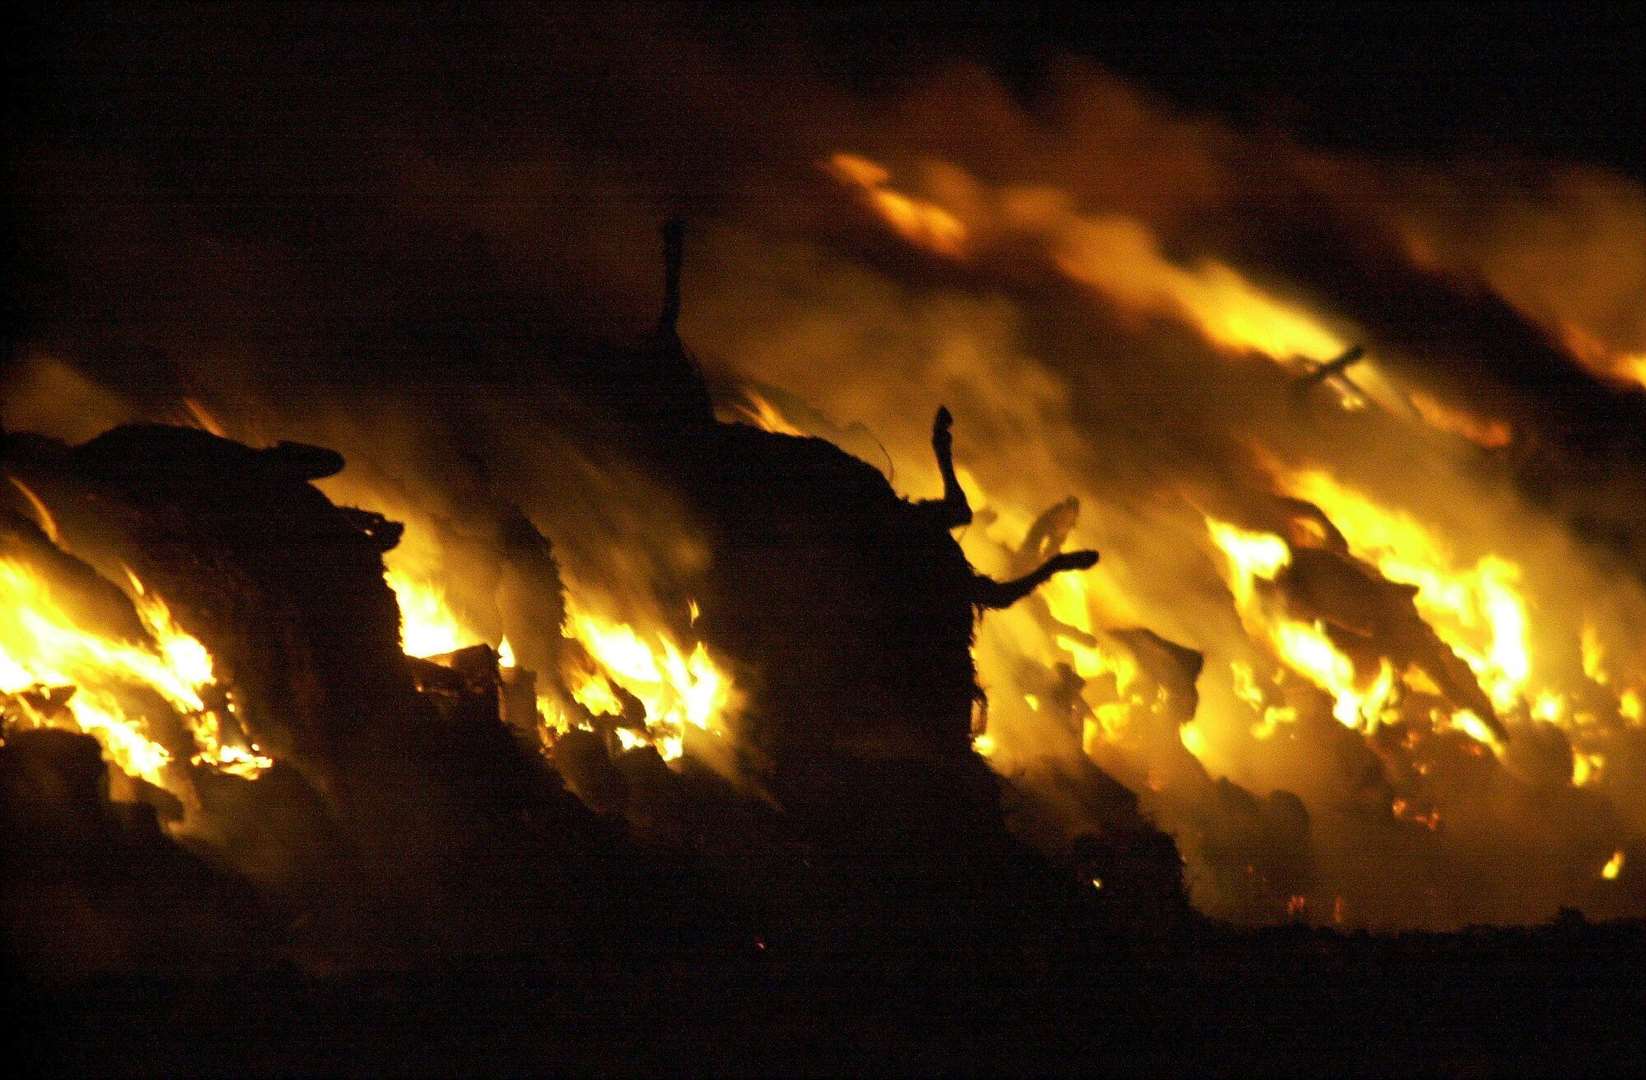 Sheep carcasses being burned at night, Sheppey, March 18, 2001.